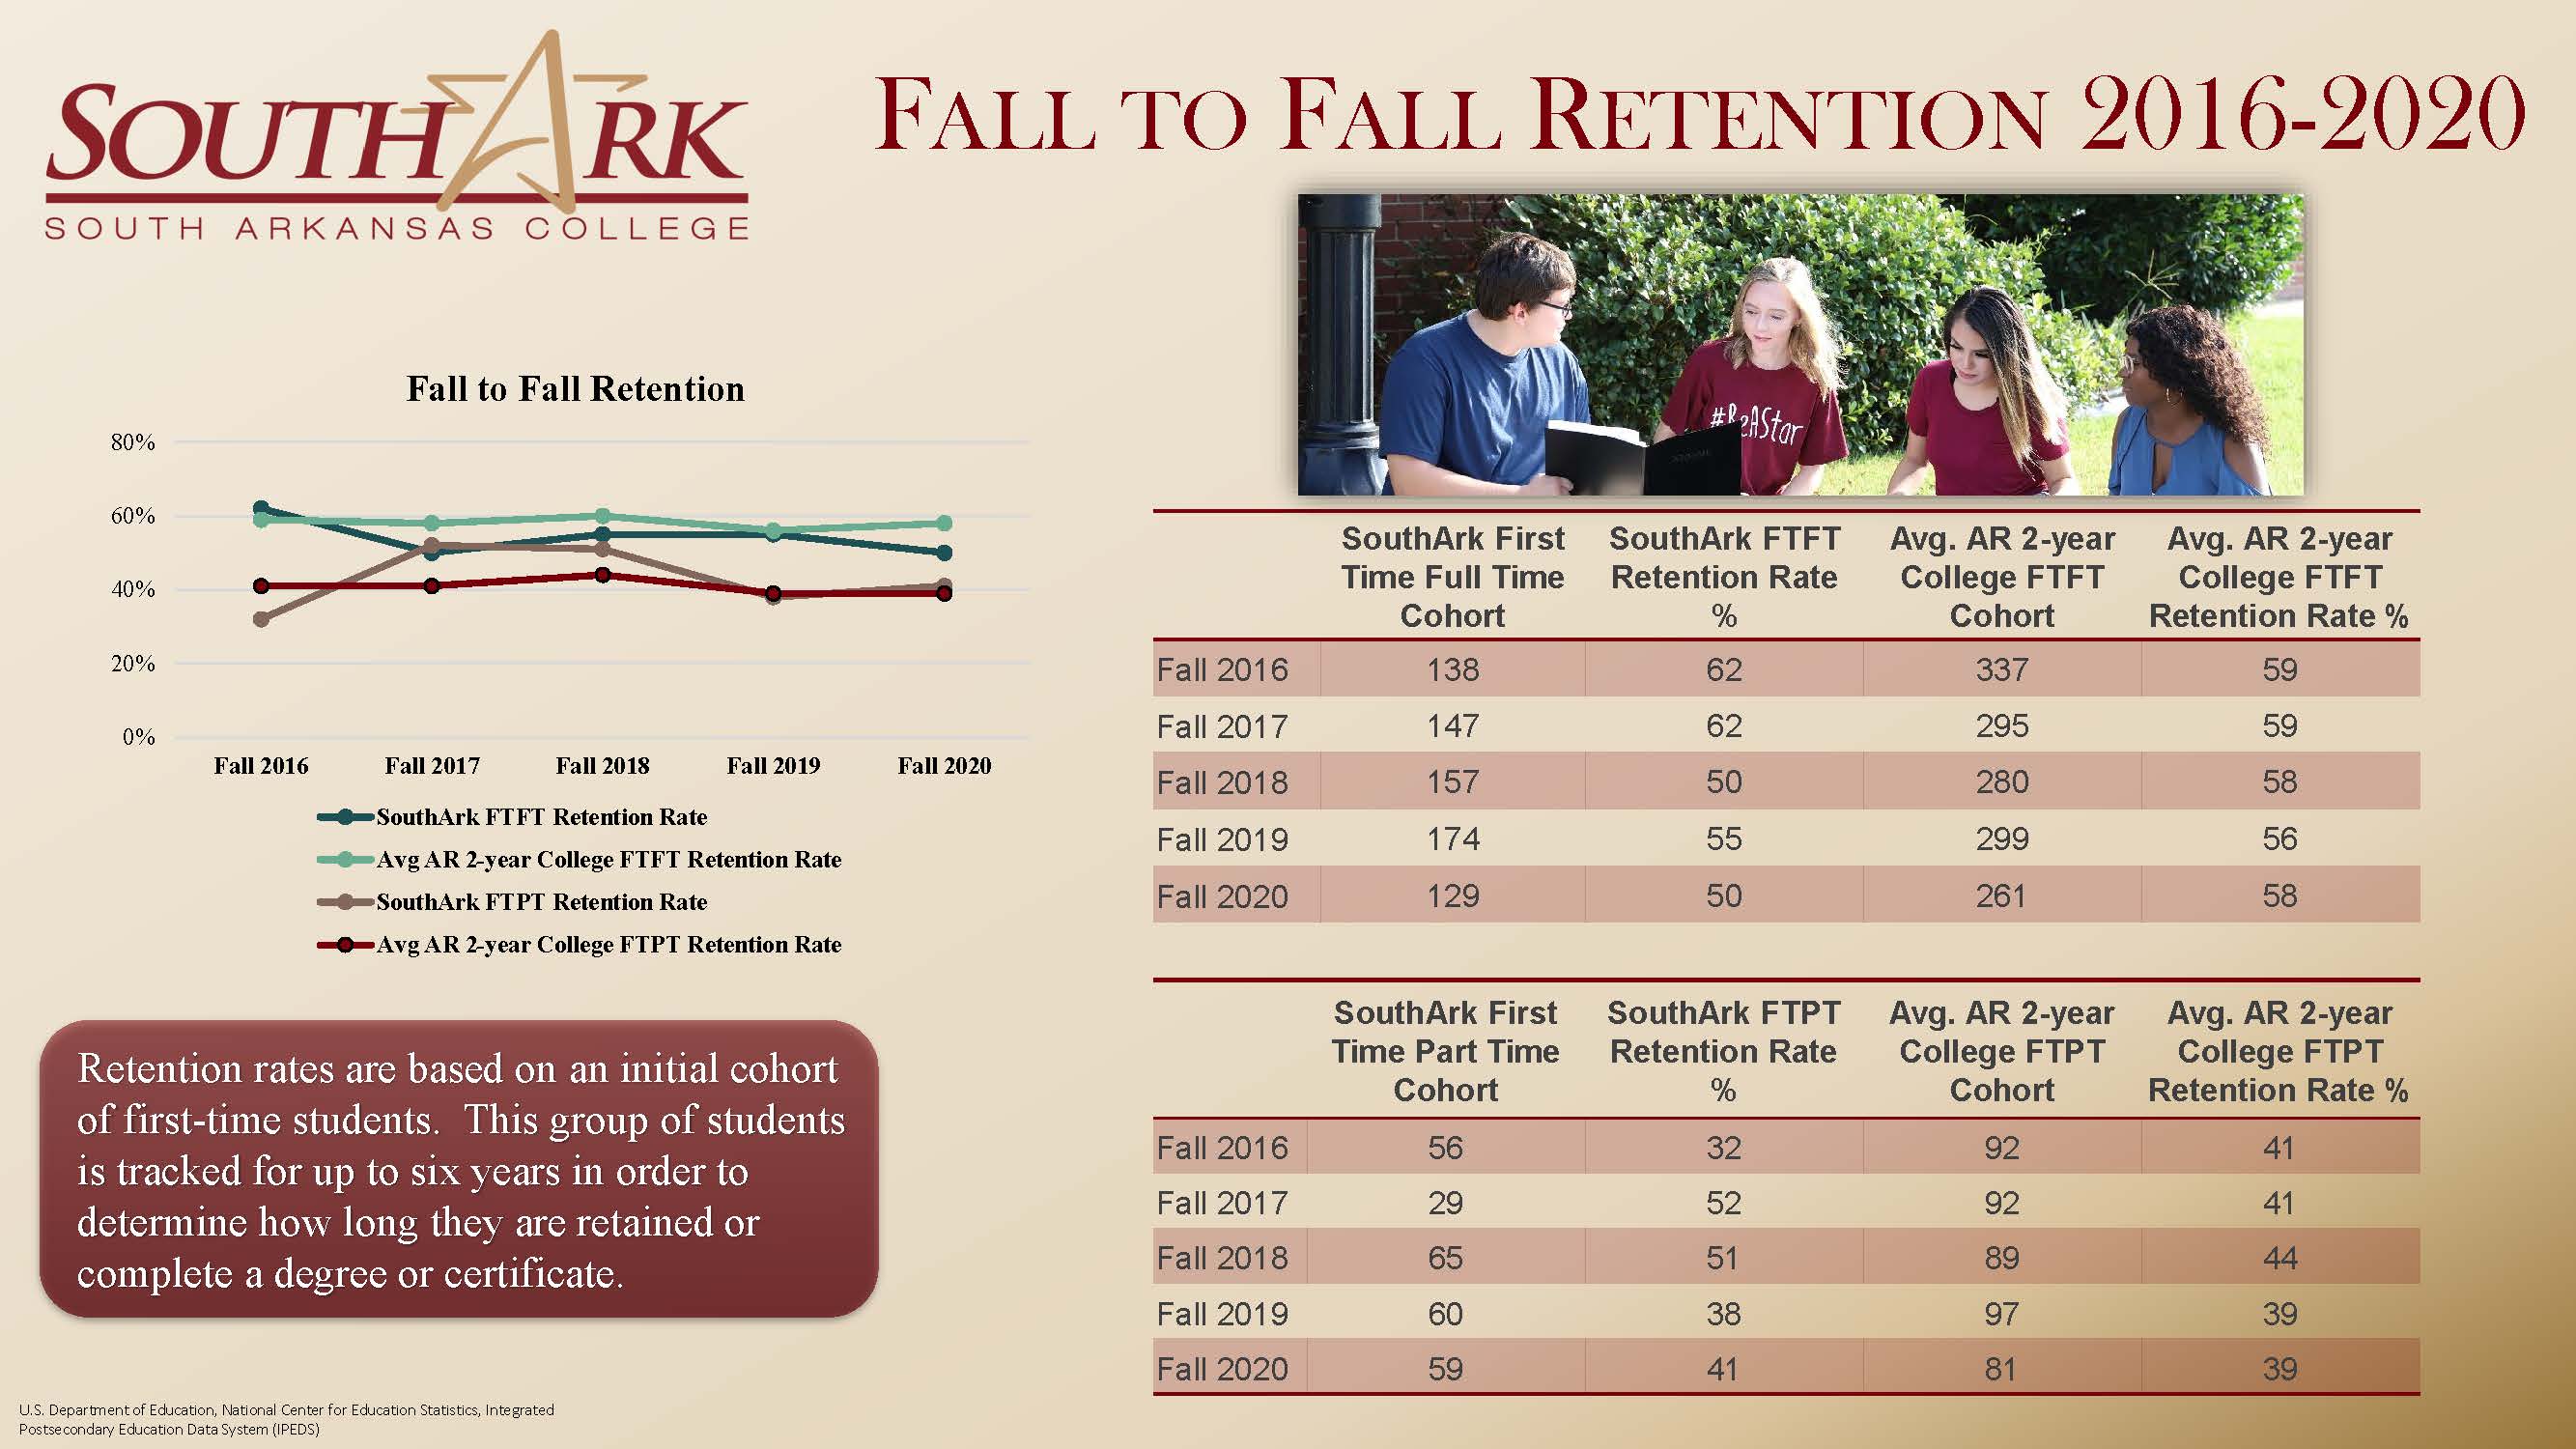 One Year Retention Rates 2016-2020